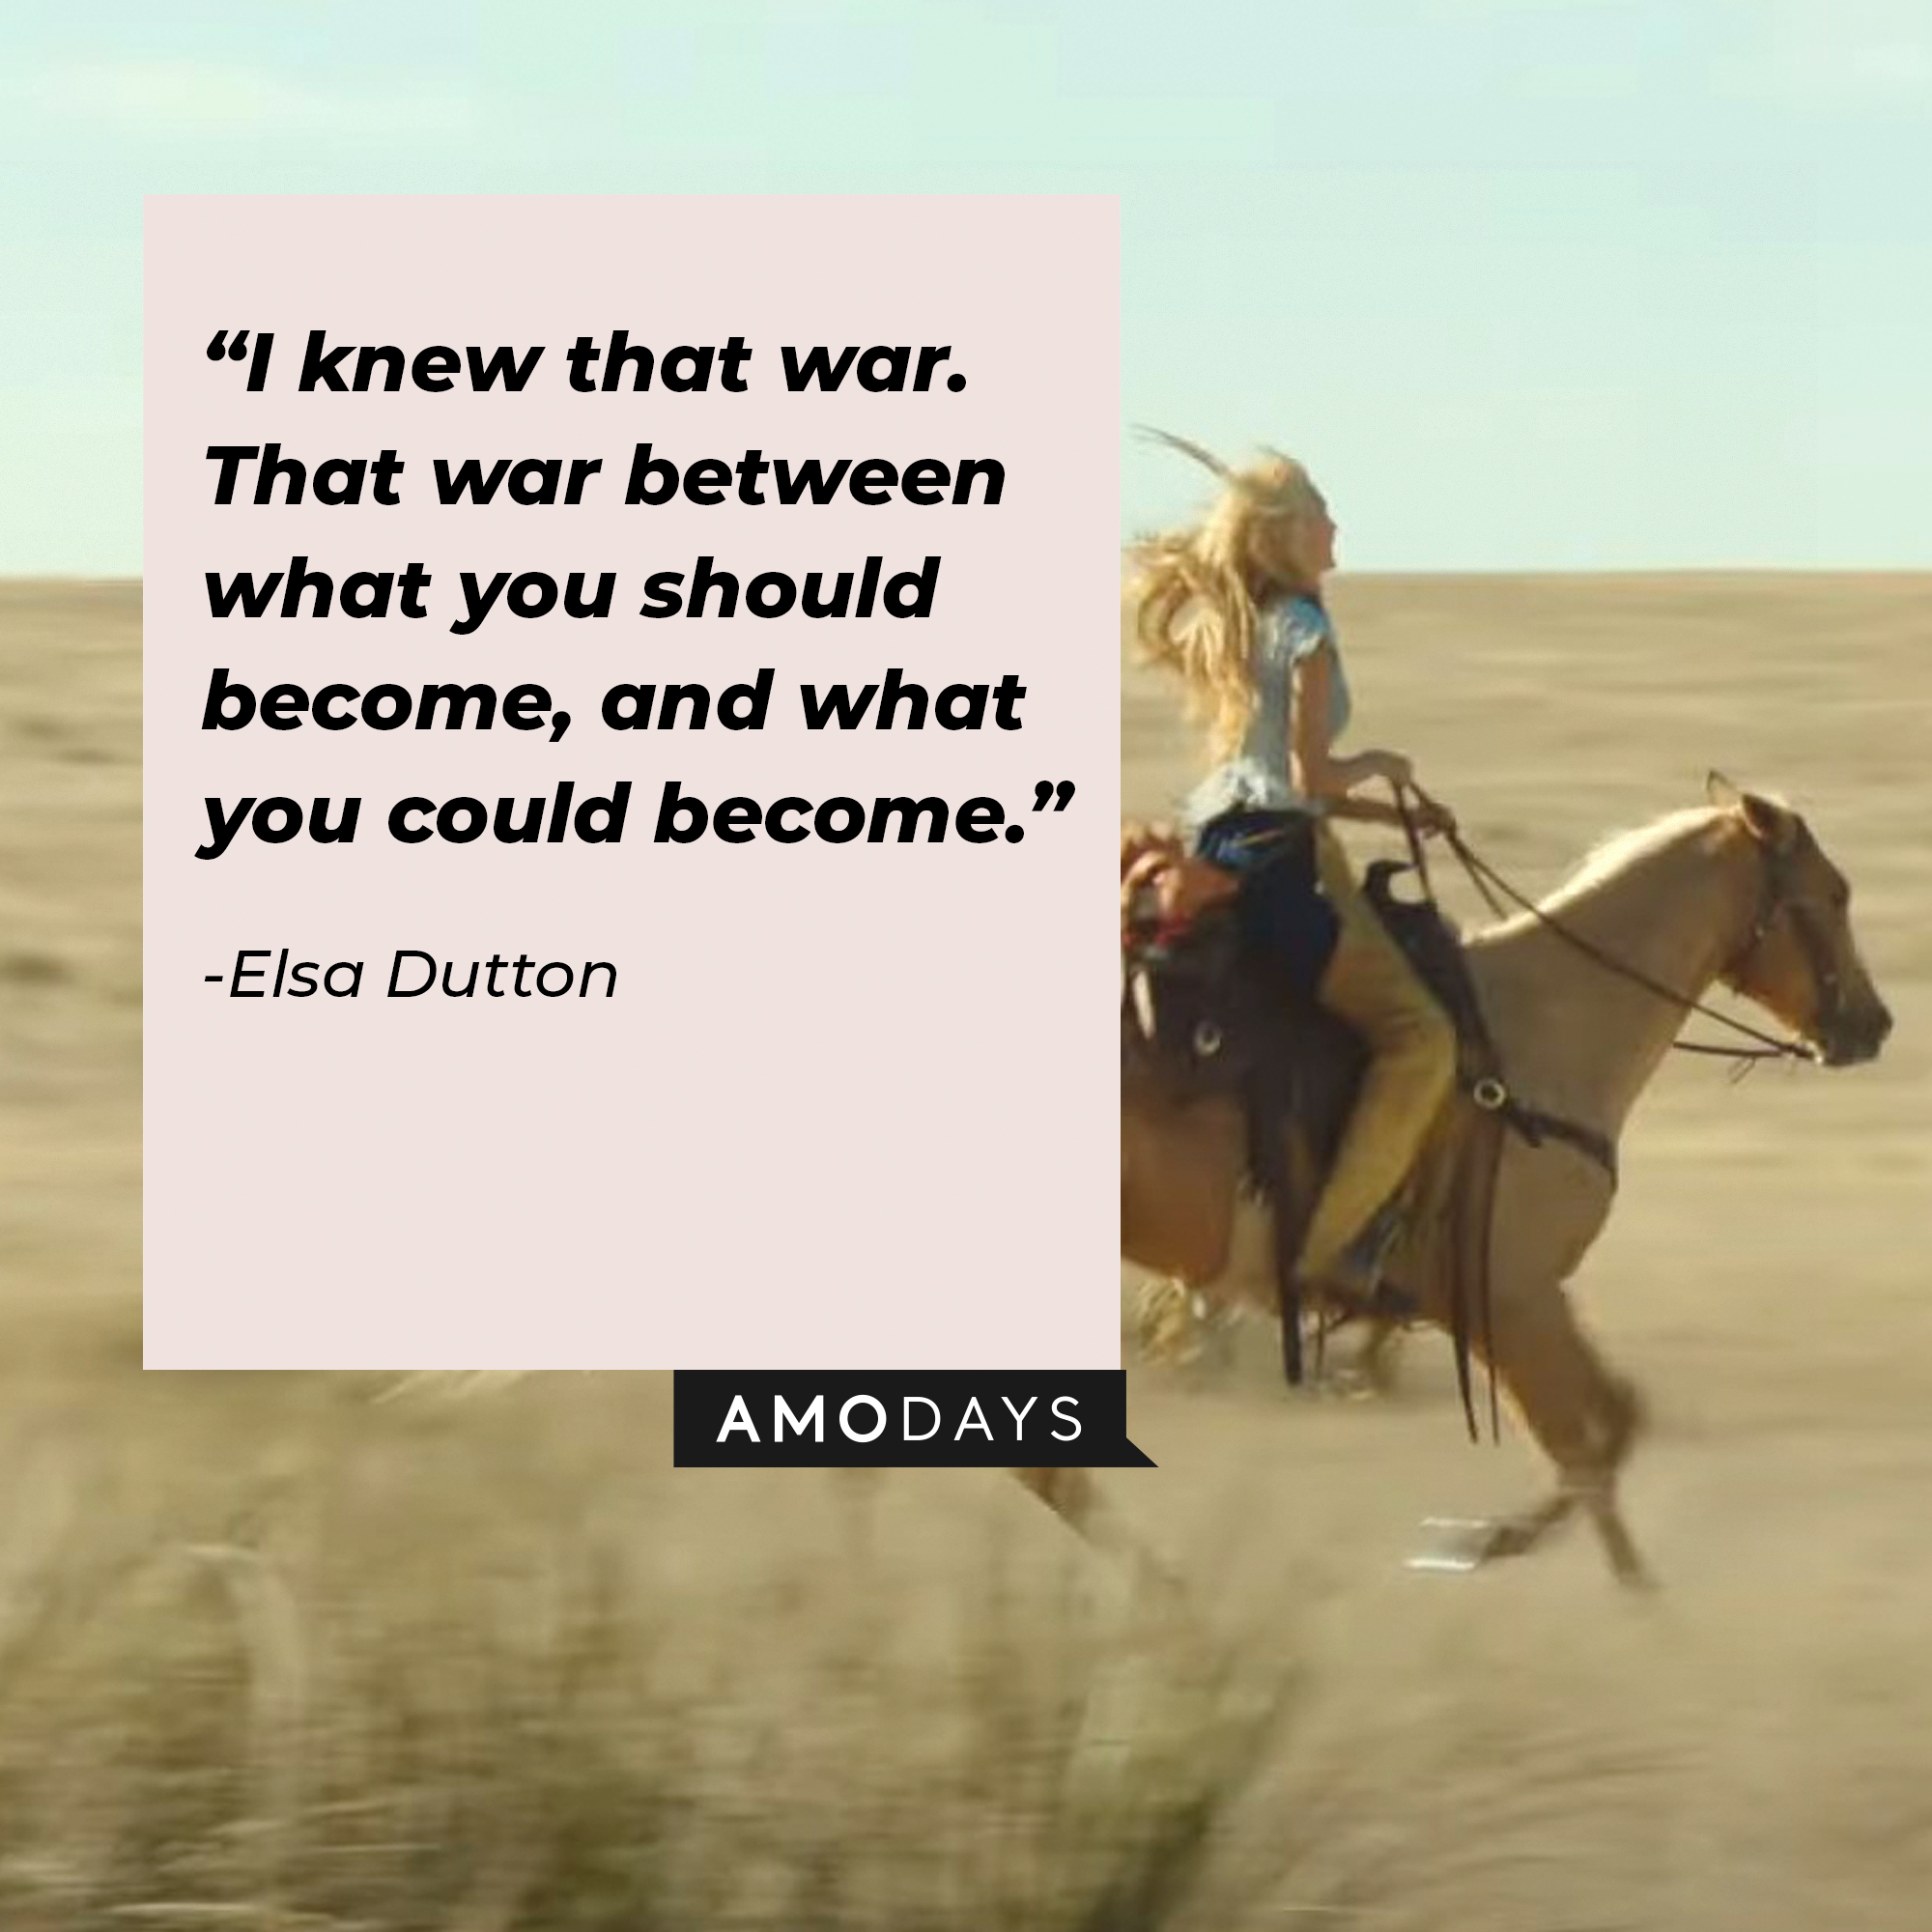 An image of Elsa Dutton with her quote: “I knew that war. That war between what you should become, and what you could become.”┃Source: youtube.com/yellowstone